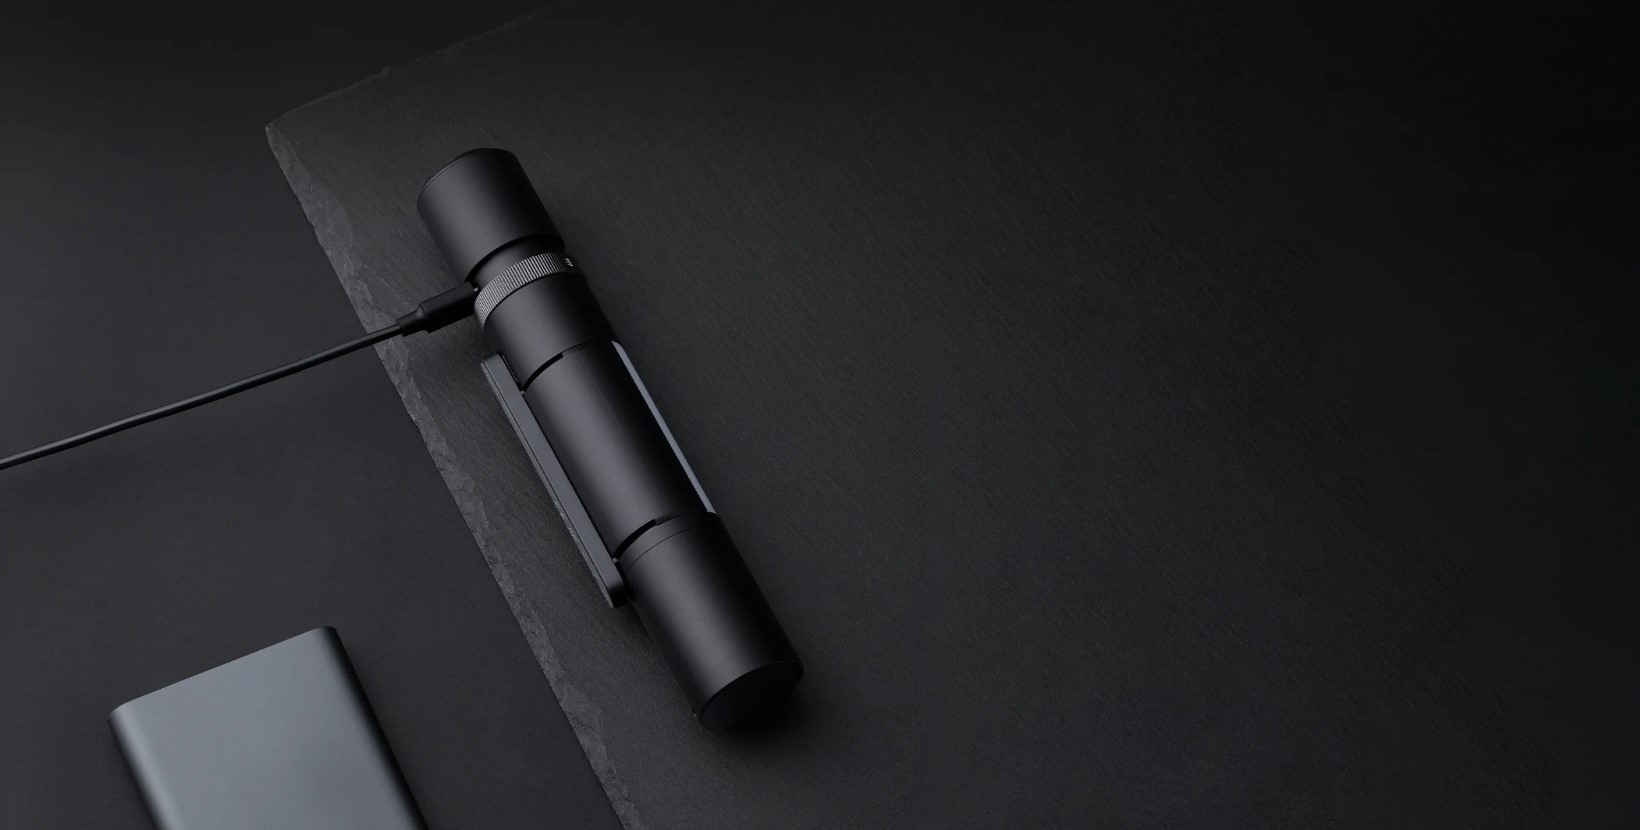 All_New_Xiaomi_Multi-function_smart_flashlight_with_3100mAh_large_capacity_lithium_battery_power_bank_sold_by_Technomobi